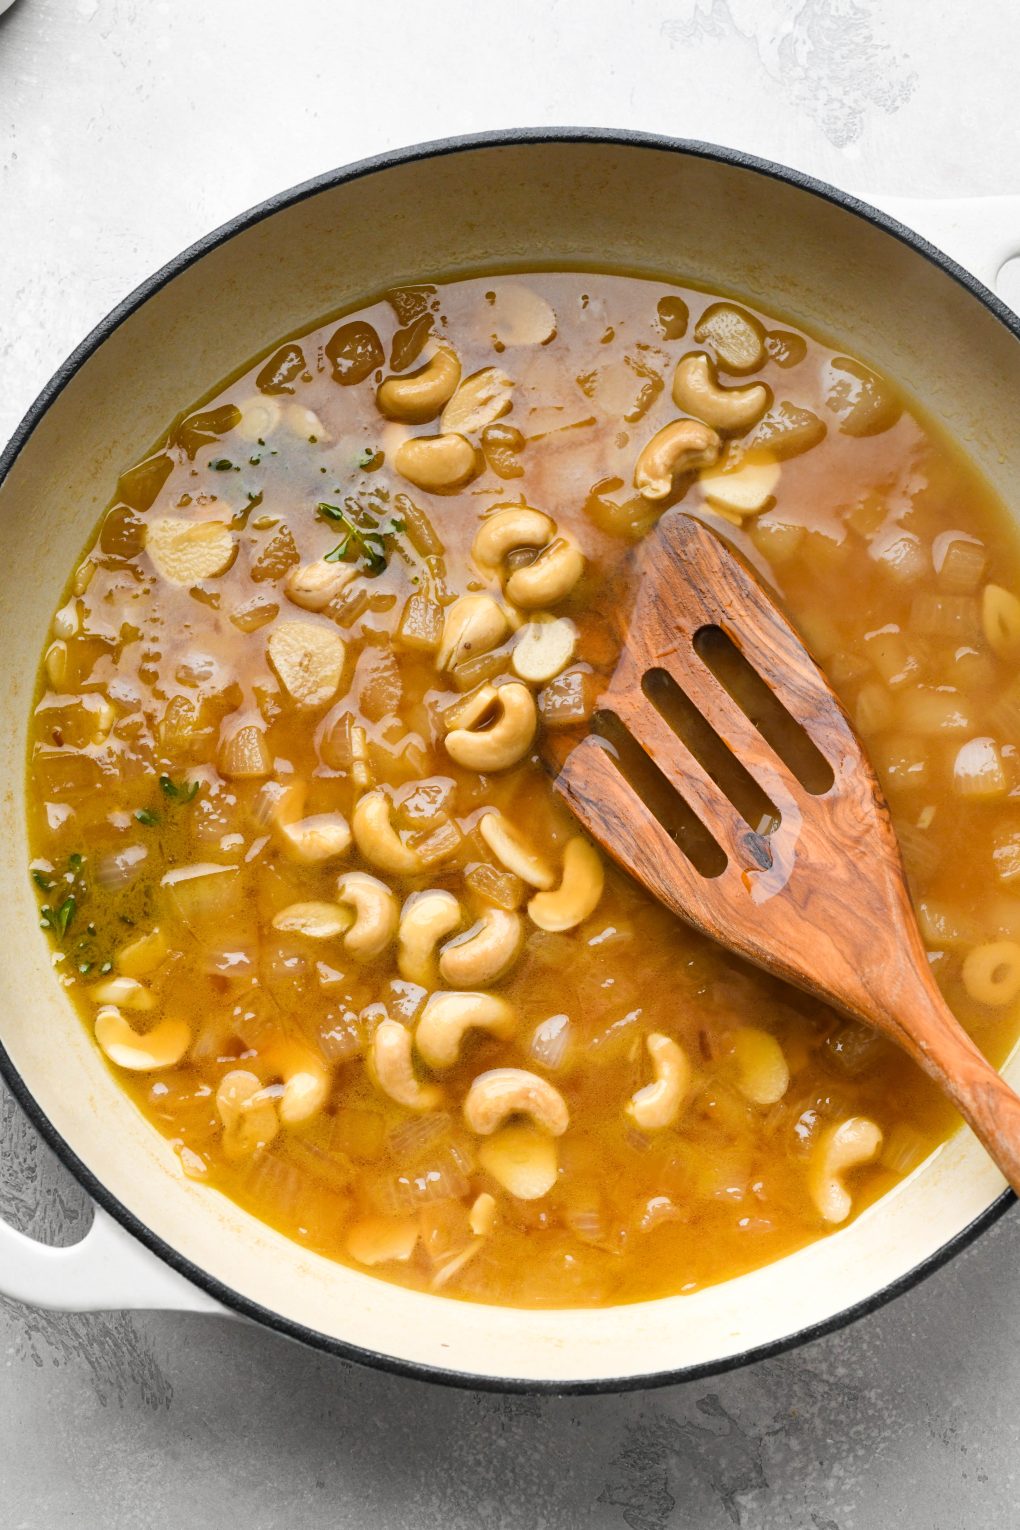 Photos showing how to make Whole30 gravy - broth reduced in skillet with diced onions, raw cashews, and fresh thyme.